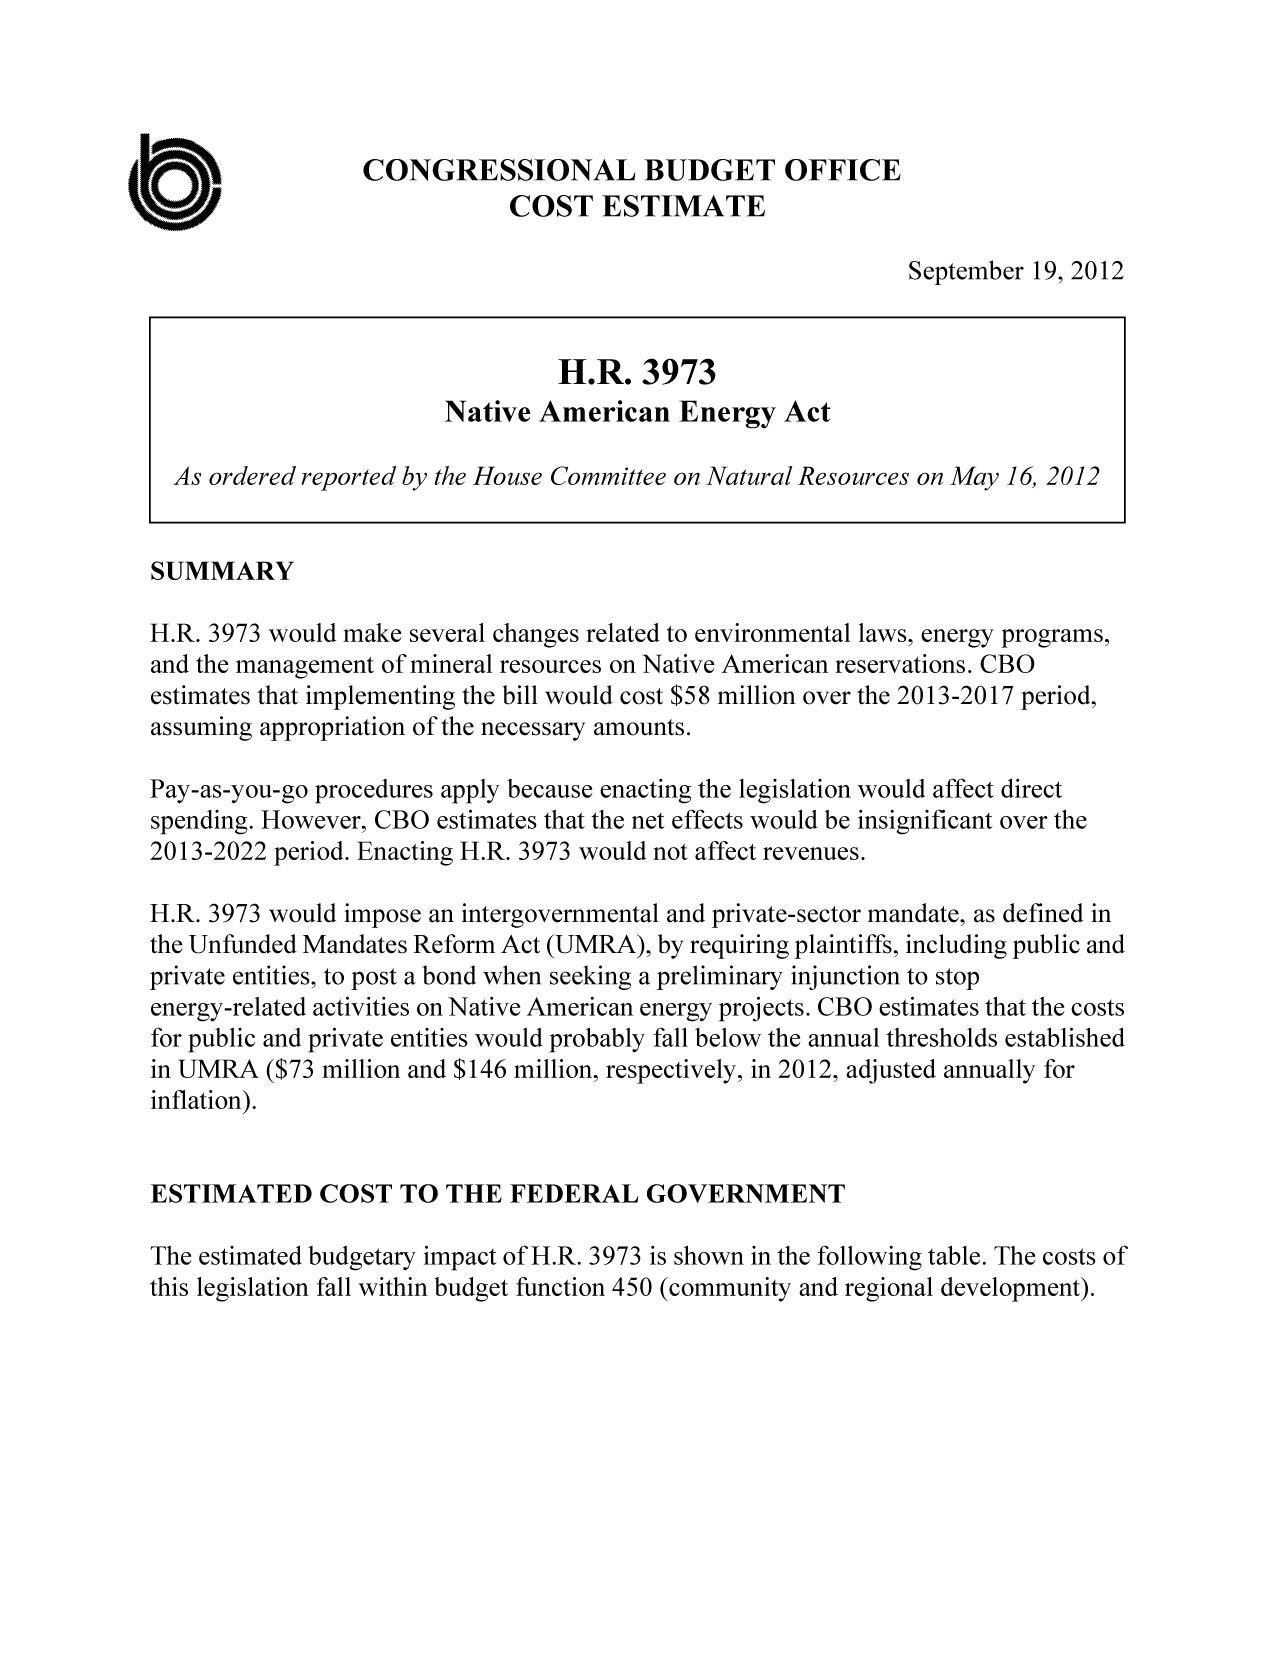 handle is hein.congrec/cbo10894 and id is 1 raw text is: CONGRESSIONAL BUDGET OFFICE
COST ESTIMATE
September 19, 2012
H.R. 3973
Native American Energy Act
As ordered reported by the House Committee on Natural Resources on May 16, 2012
SUMMARY
H.R. 3973 would make several changes related to environmental laws, energy programs,
and the management of mineral resources on Native American reservations. CBO
estimates that implementing the bill would cost $58 million over the 2013-2017 period,
assuming appropriation of the necessary amounts.
Pay-as-you-go procedures apply because enacting the legislation would affect direct
spending. However, CBO estimates that the net effects would be insignificant over the
2013-2022 period. Enacting H.R. 3973 would not affect revenues.
H.R. 3973 would impose an intergovernmental and private-sector mandate, as defined in
the Unfunded Mandates Reform Act (UMRA), by requiring plaintiffs, including public and
private entities, to post a bond when seeking a preliminary injunction to stop
energy-related activities on Native American energy projects. CBO estimates that the costs
for public and private entities would probably fall below the annual thresholds established
in UMRA ($73 million and $146 million, respectively, in 2012, adjusted annually for
inflation).
ESTIMATED COST TO THE FEDERAL GOVERNMENT
The estimated budgetary impact of H.R. 3973 is shown in the following table. The costs of
this legislation fall within budget function 450 (community and regional development).


